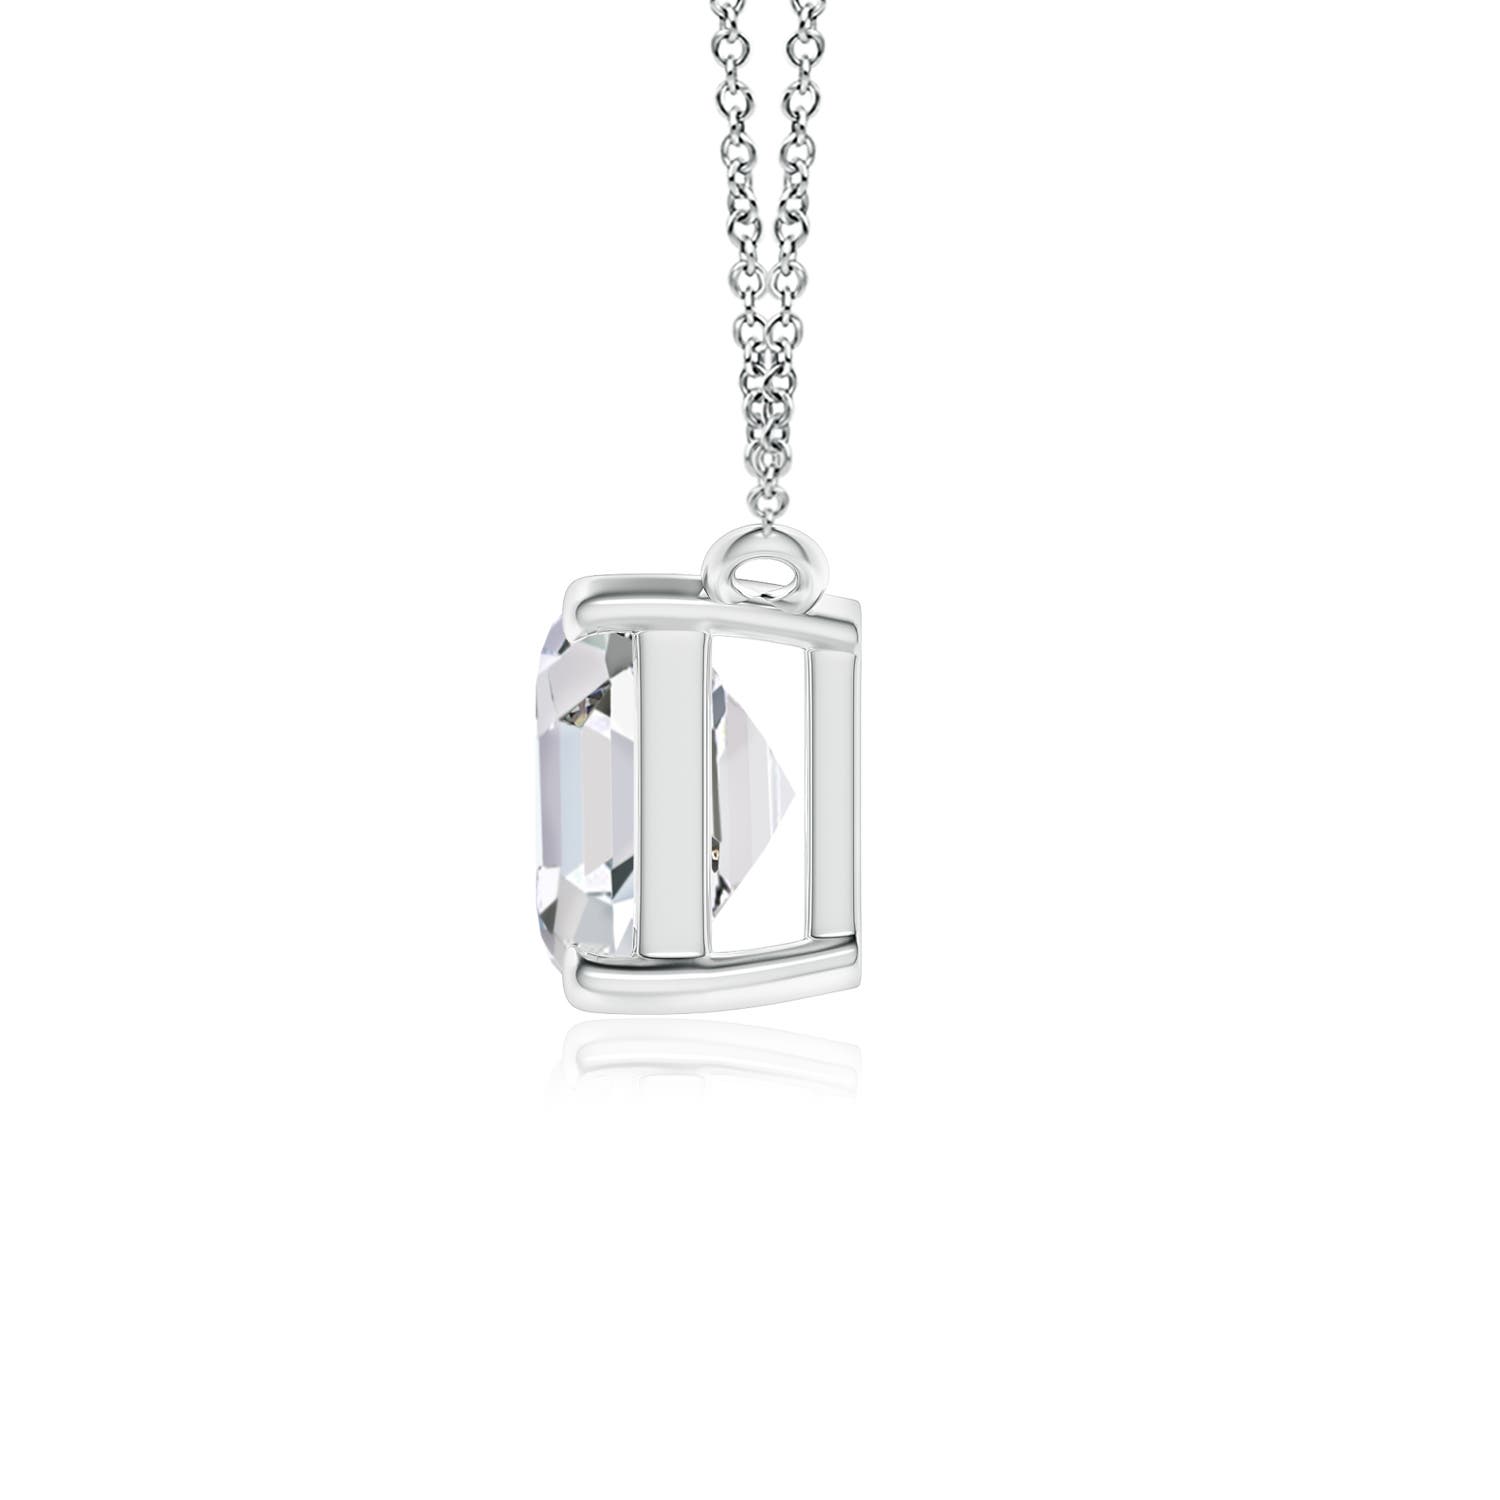 H, SI2 / 2 CT / 18 KT White Gold